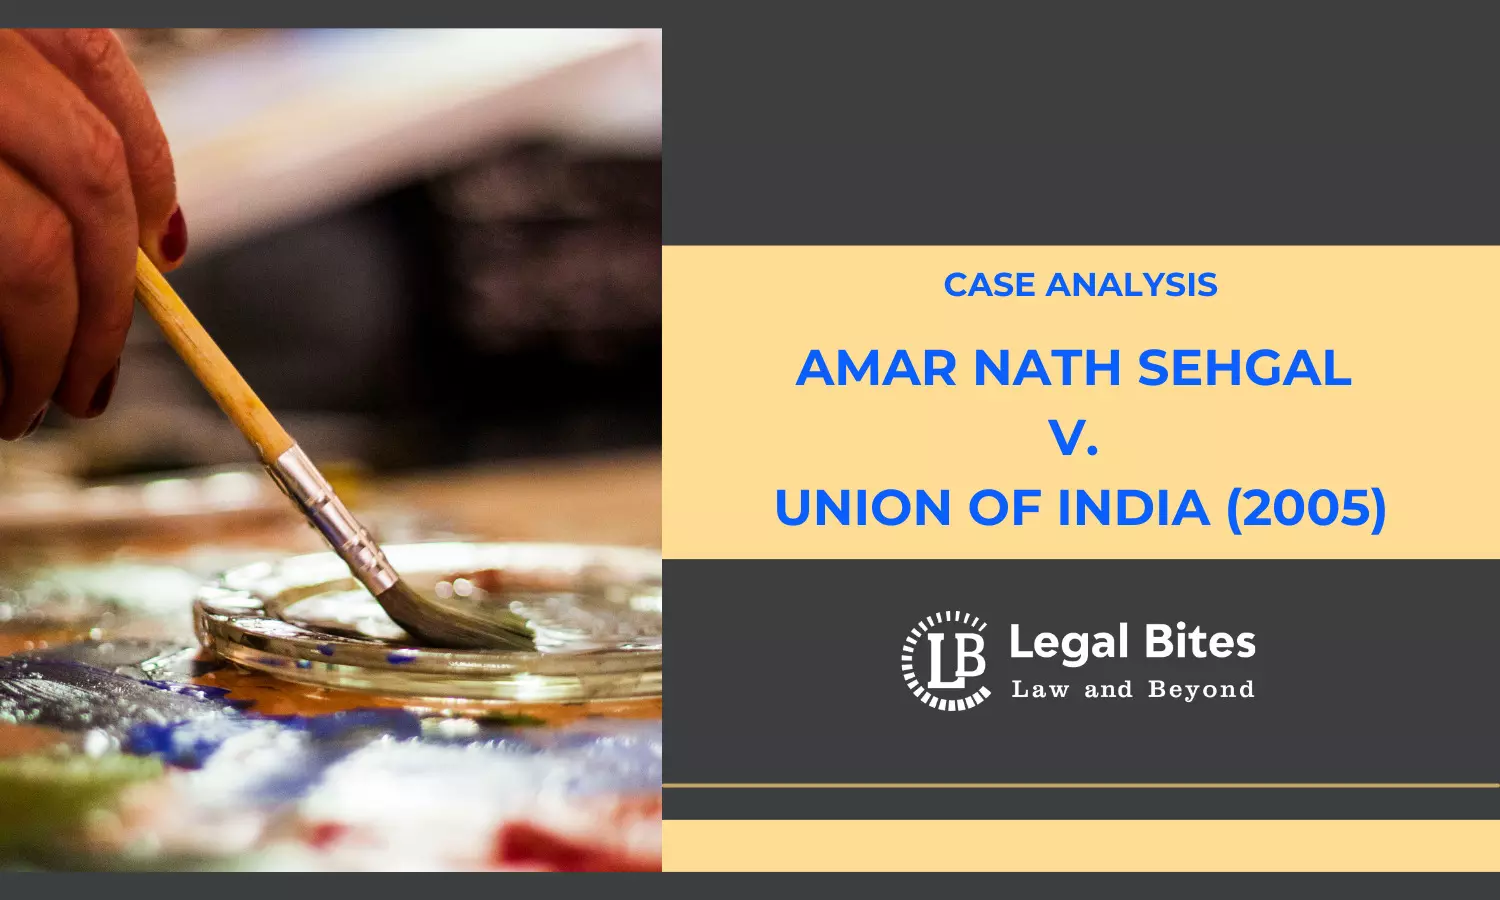 Case Analysis: Amar Nath Sehgal v. Union of India (2005) | Moral Right of an Artist